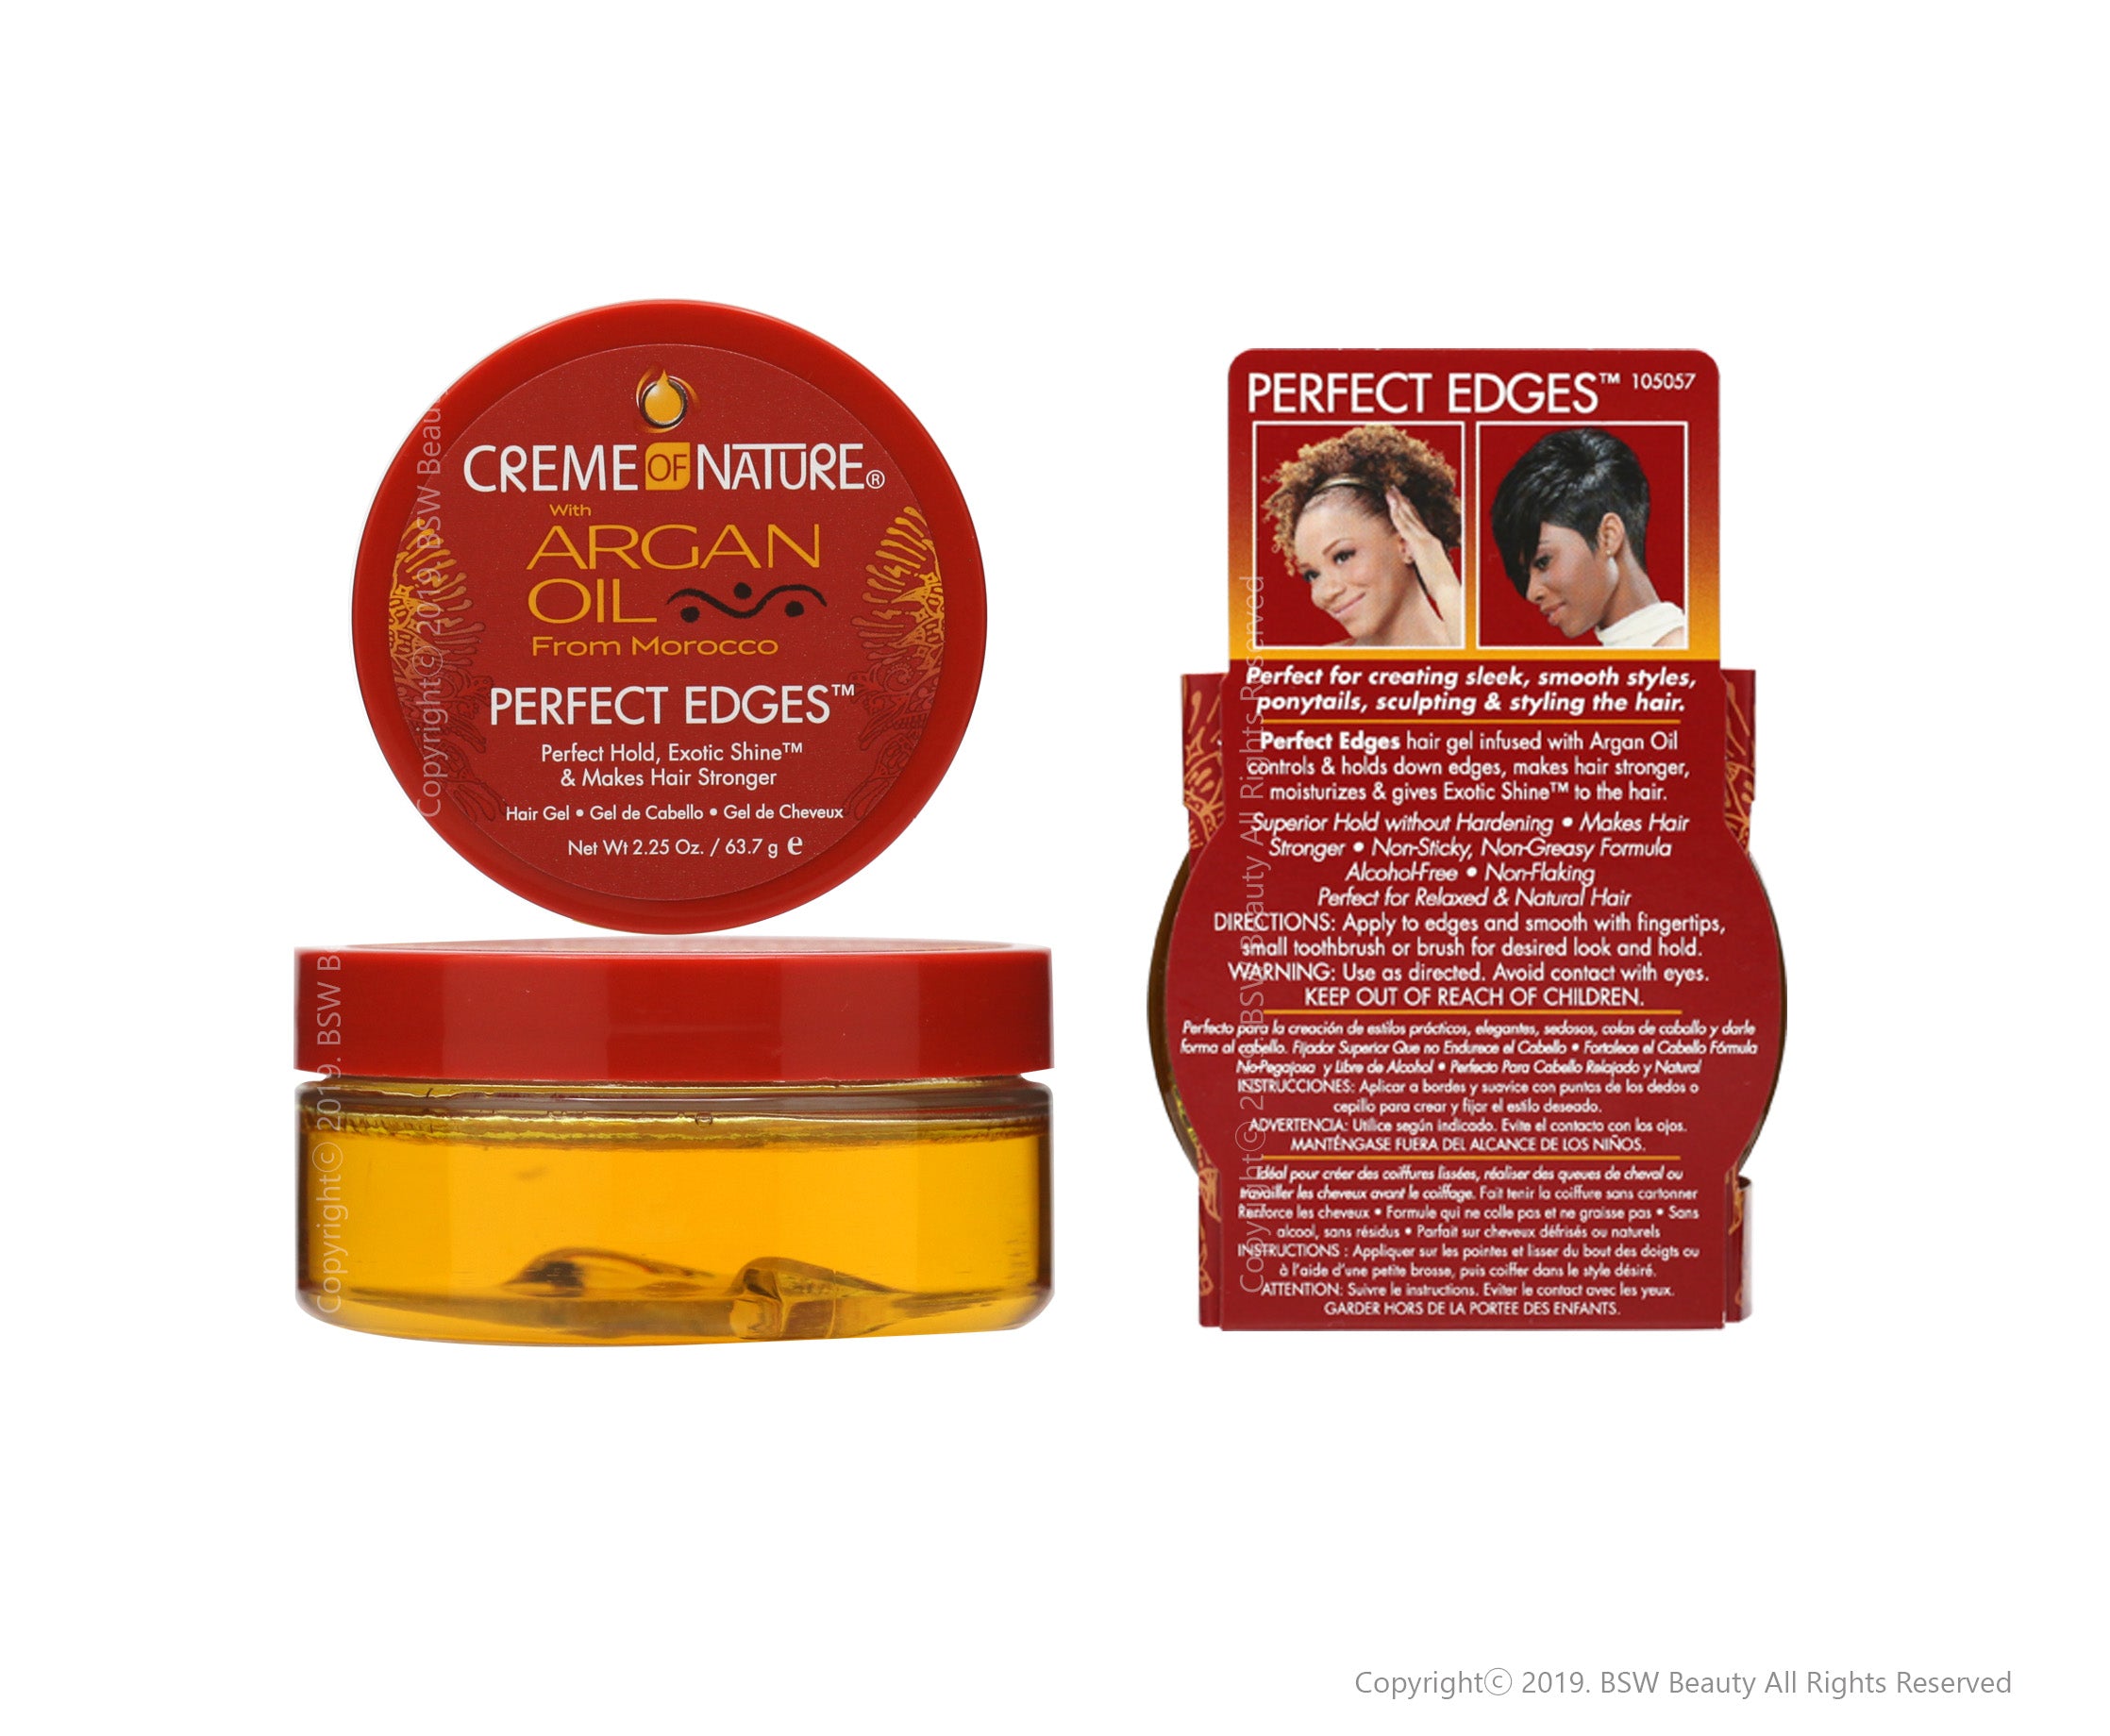 Creme of Nature® Argan Oil from Morocco Perfect Edges™ - Creme of Nature®